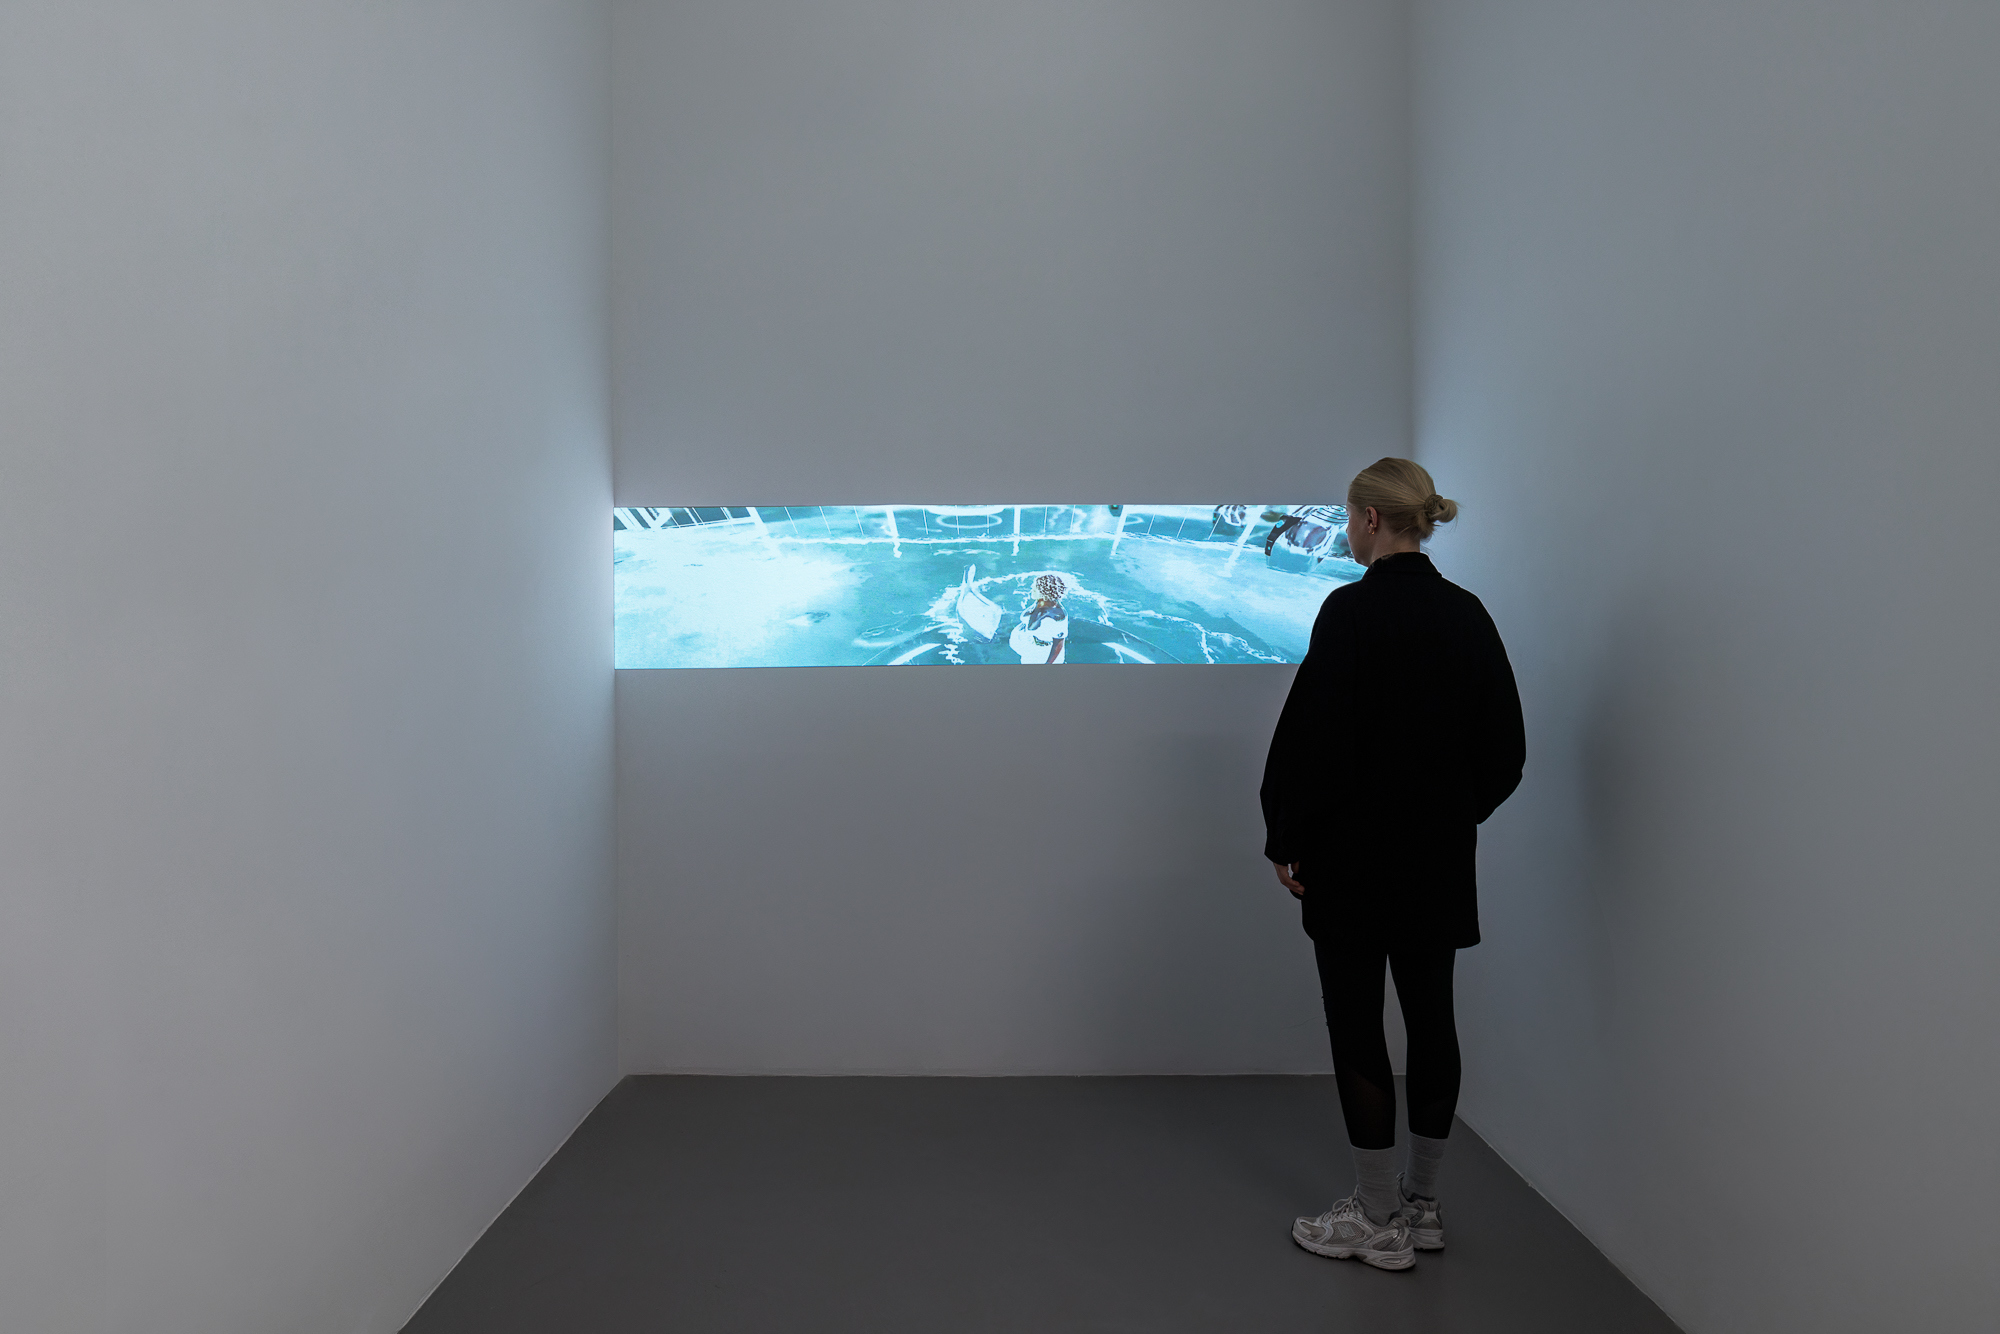 Installation view "BODY CARE" with Keiken, Ryan Vautier and Sakeema Crook, Metaverse: we are at the end of something, 2020, curated by Madeleine Freund, on view 9 November â€“ 3 December 2022 at SchleifmÃ¼hlgasse 1, Vienna.